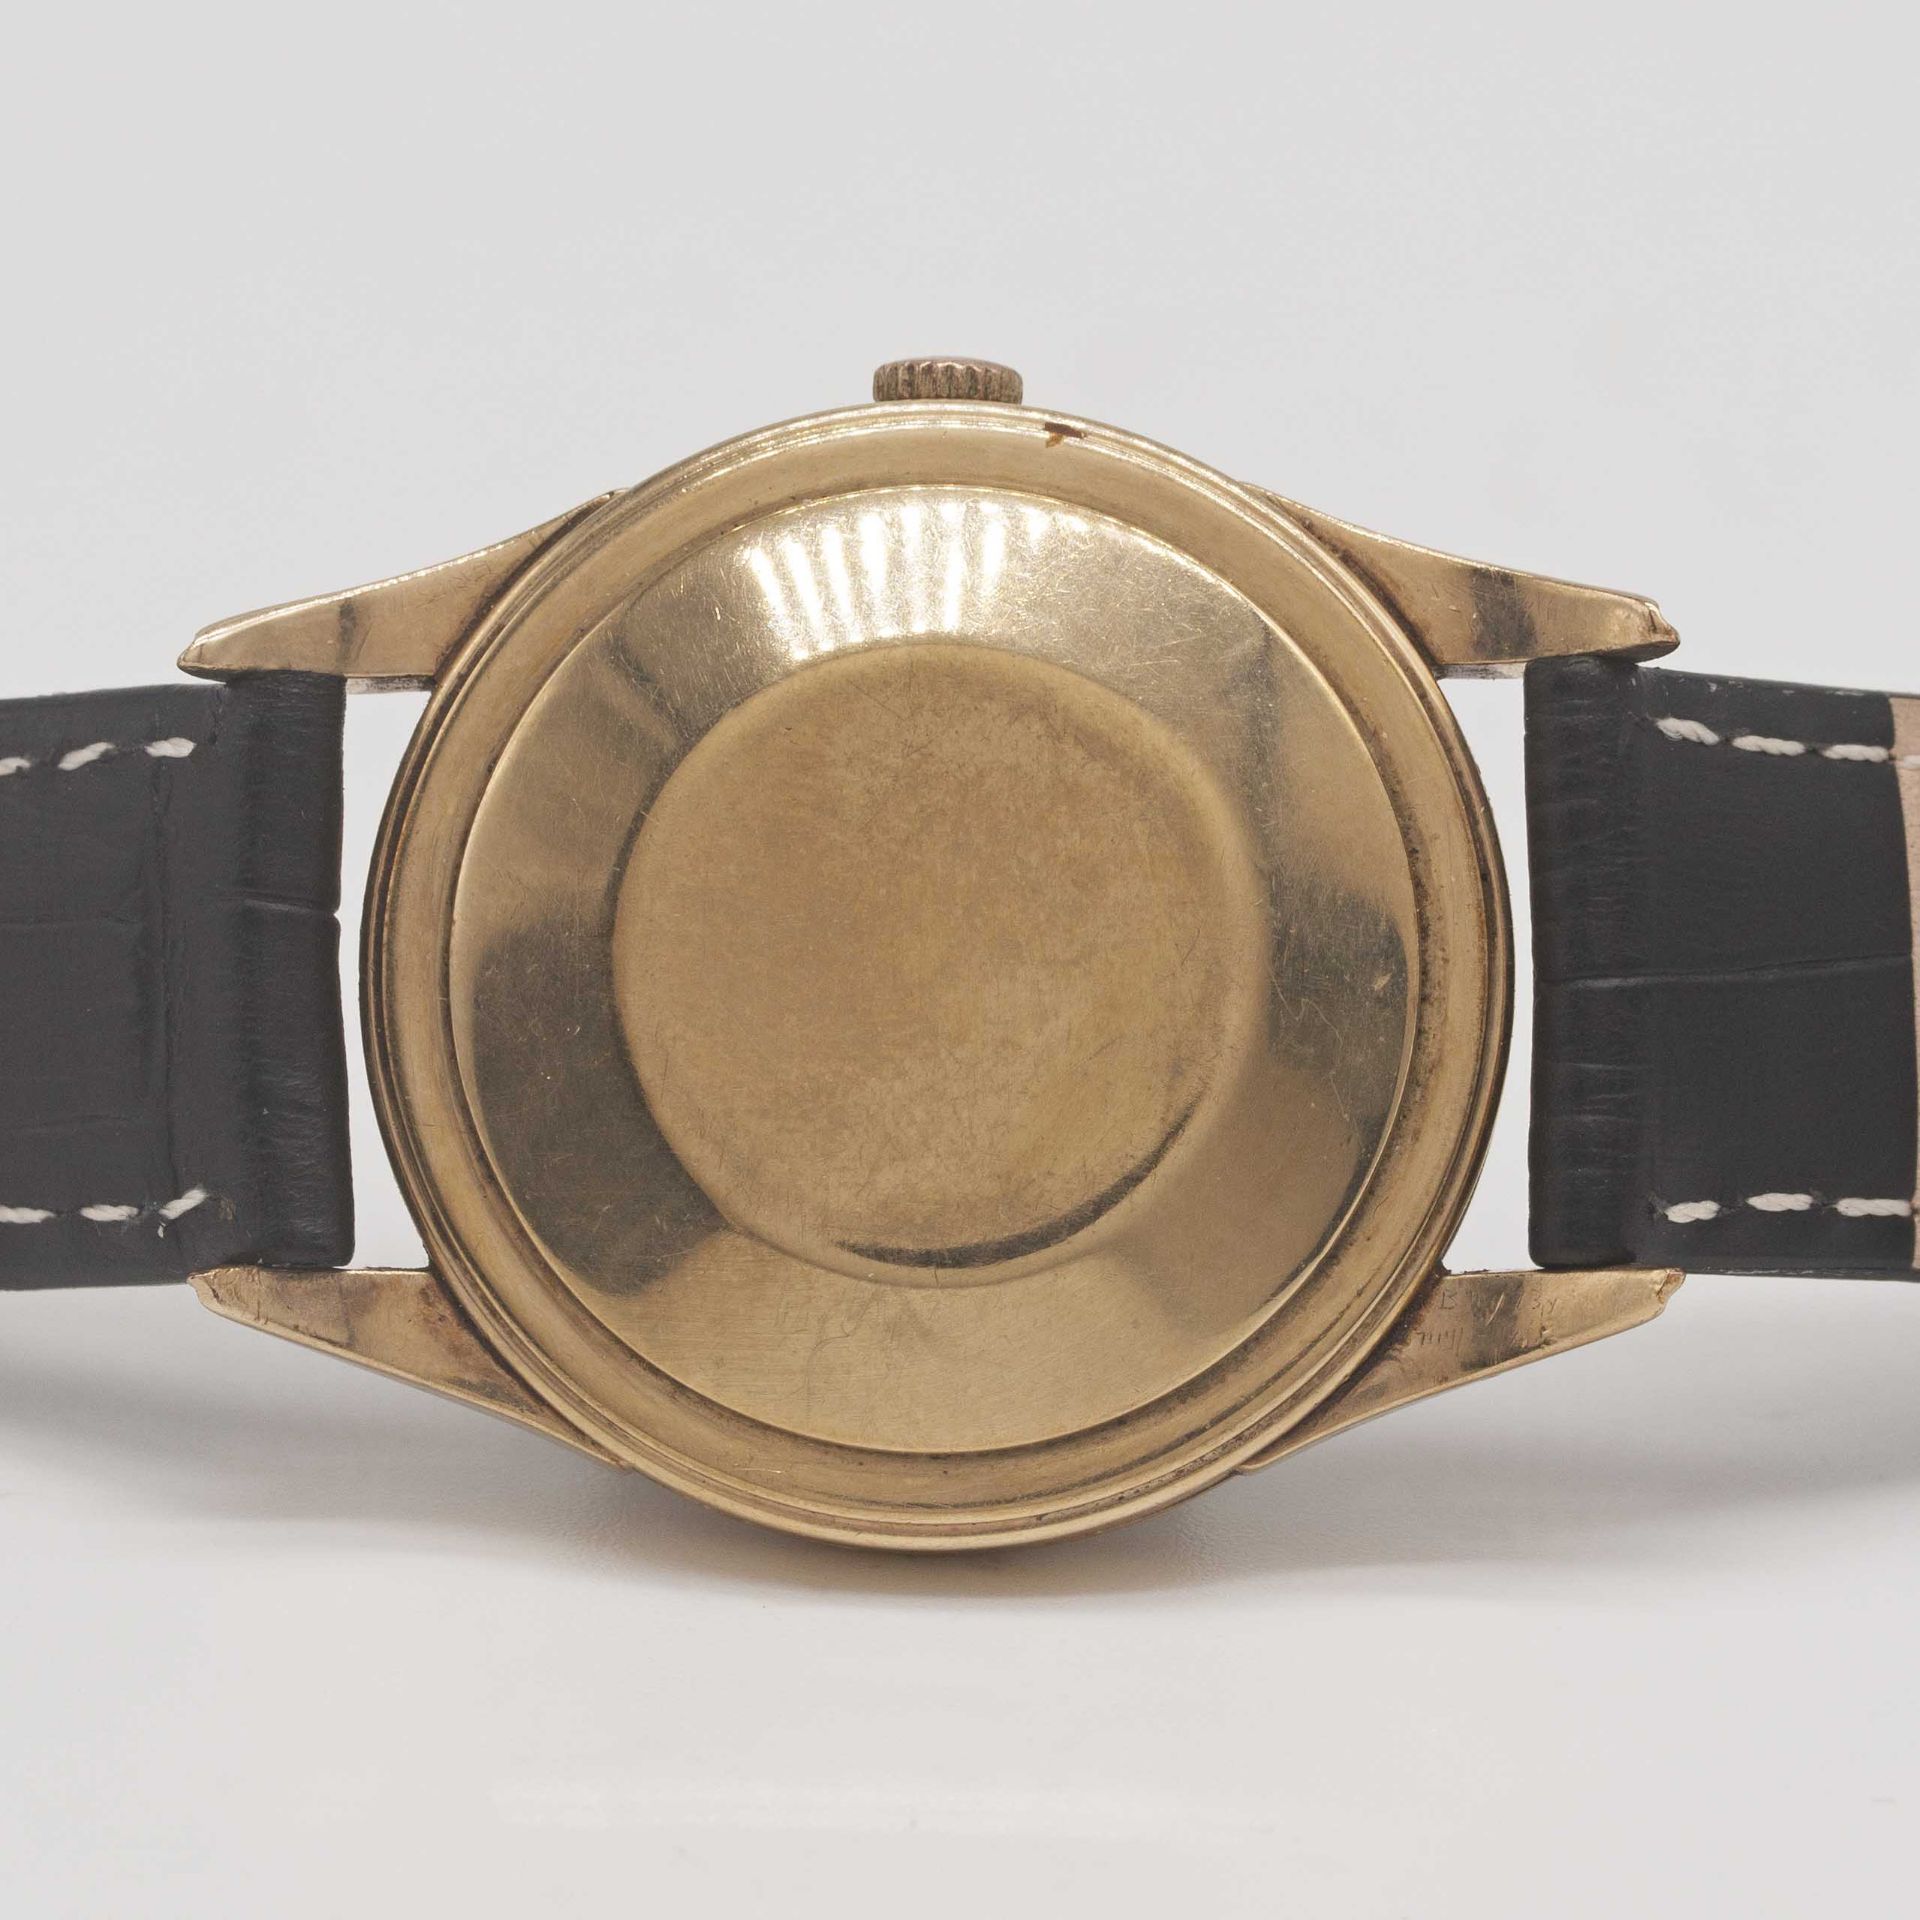 A GENTLEMAN'S 9CT SOLID GOLD ROLEX OYSTER PERPETUAL WRIST WATCH CIRCA 1950s Movement: Automatic " - Image 7 of 10